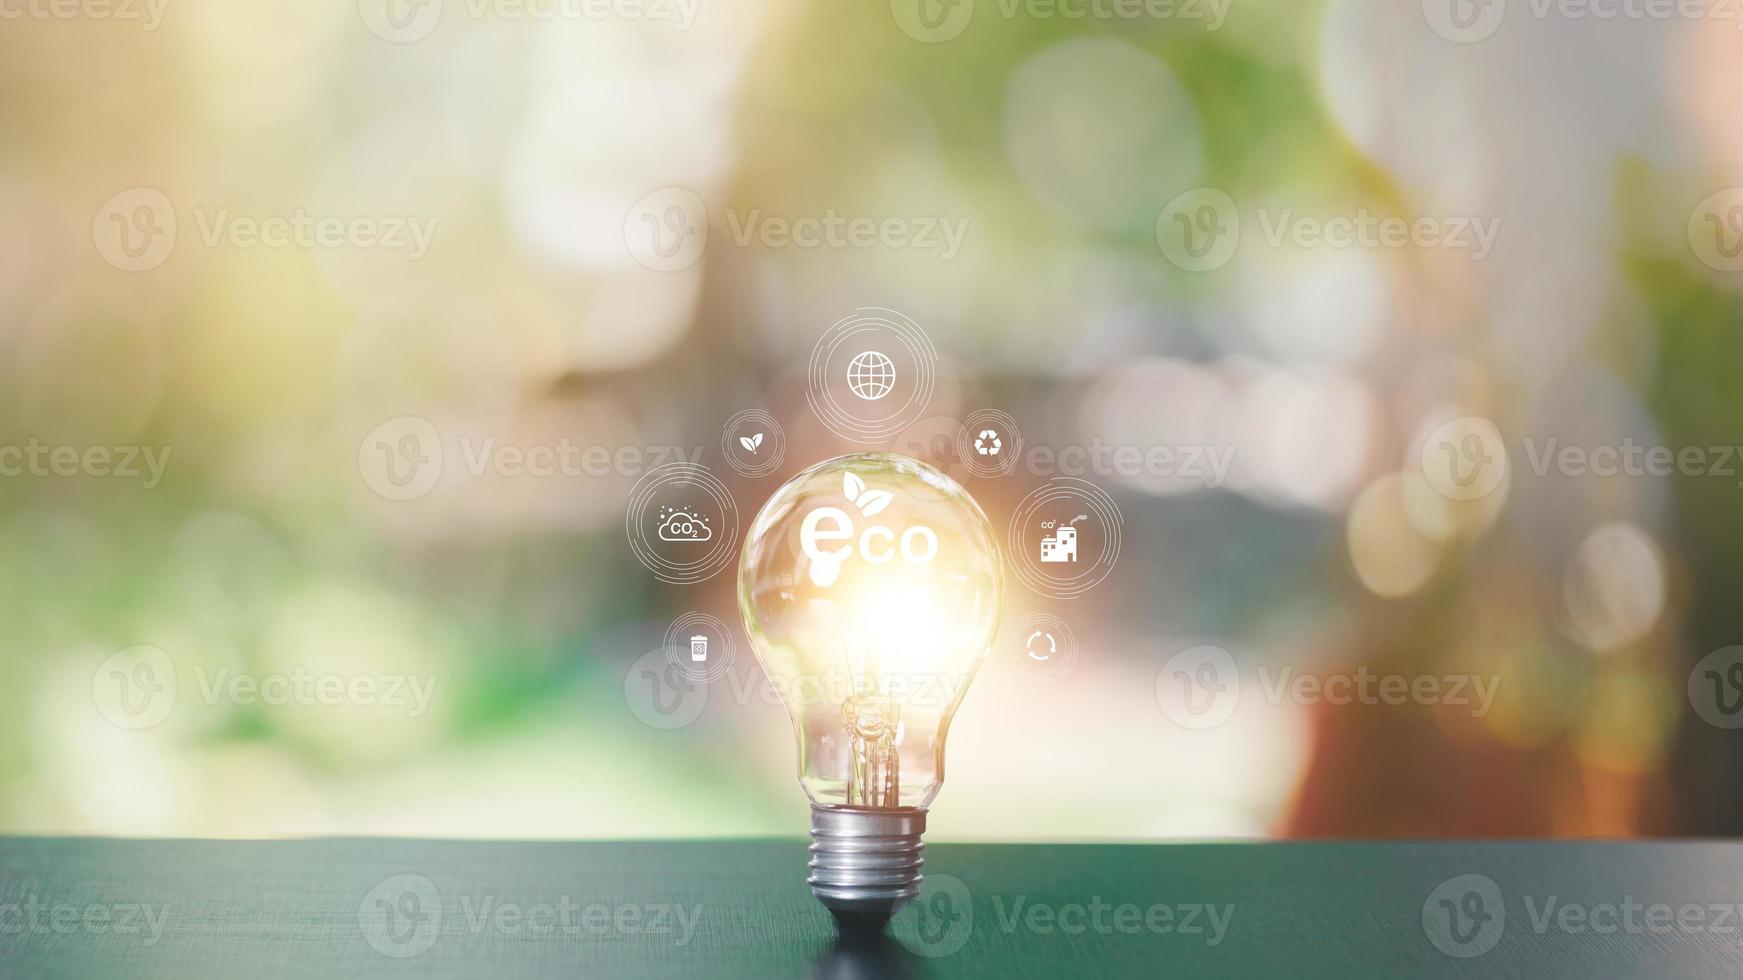 protecting the environment alternative energy Sustainable renewable energy sources Green energy innovation and environmentally friendly energy technology,Light bulb on table and nature background photo